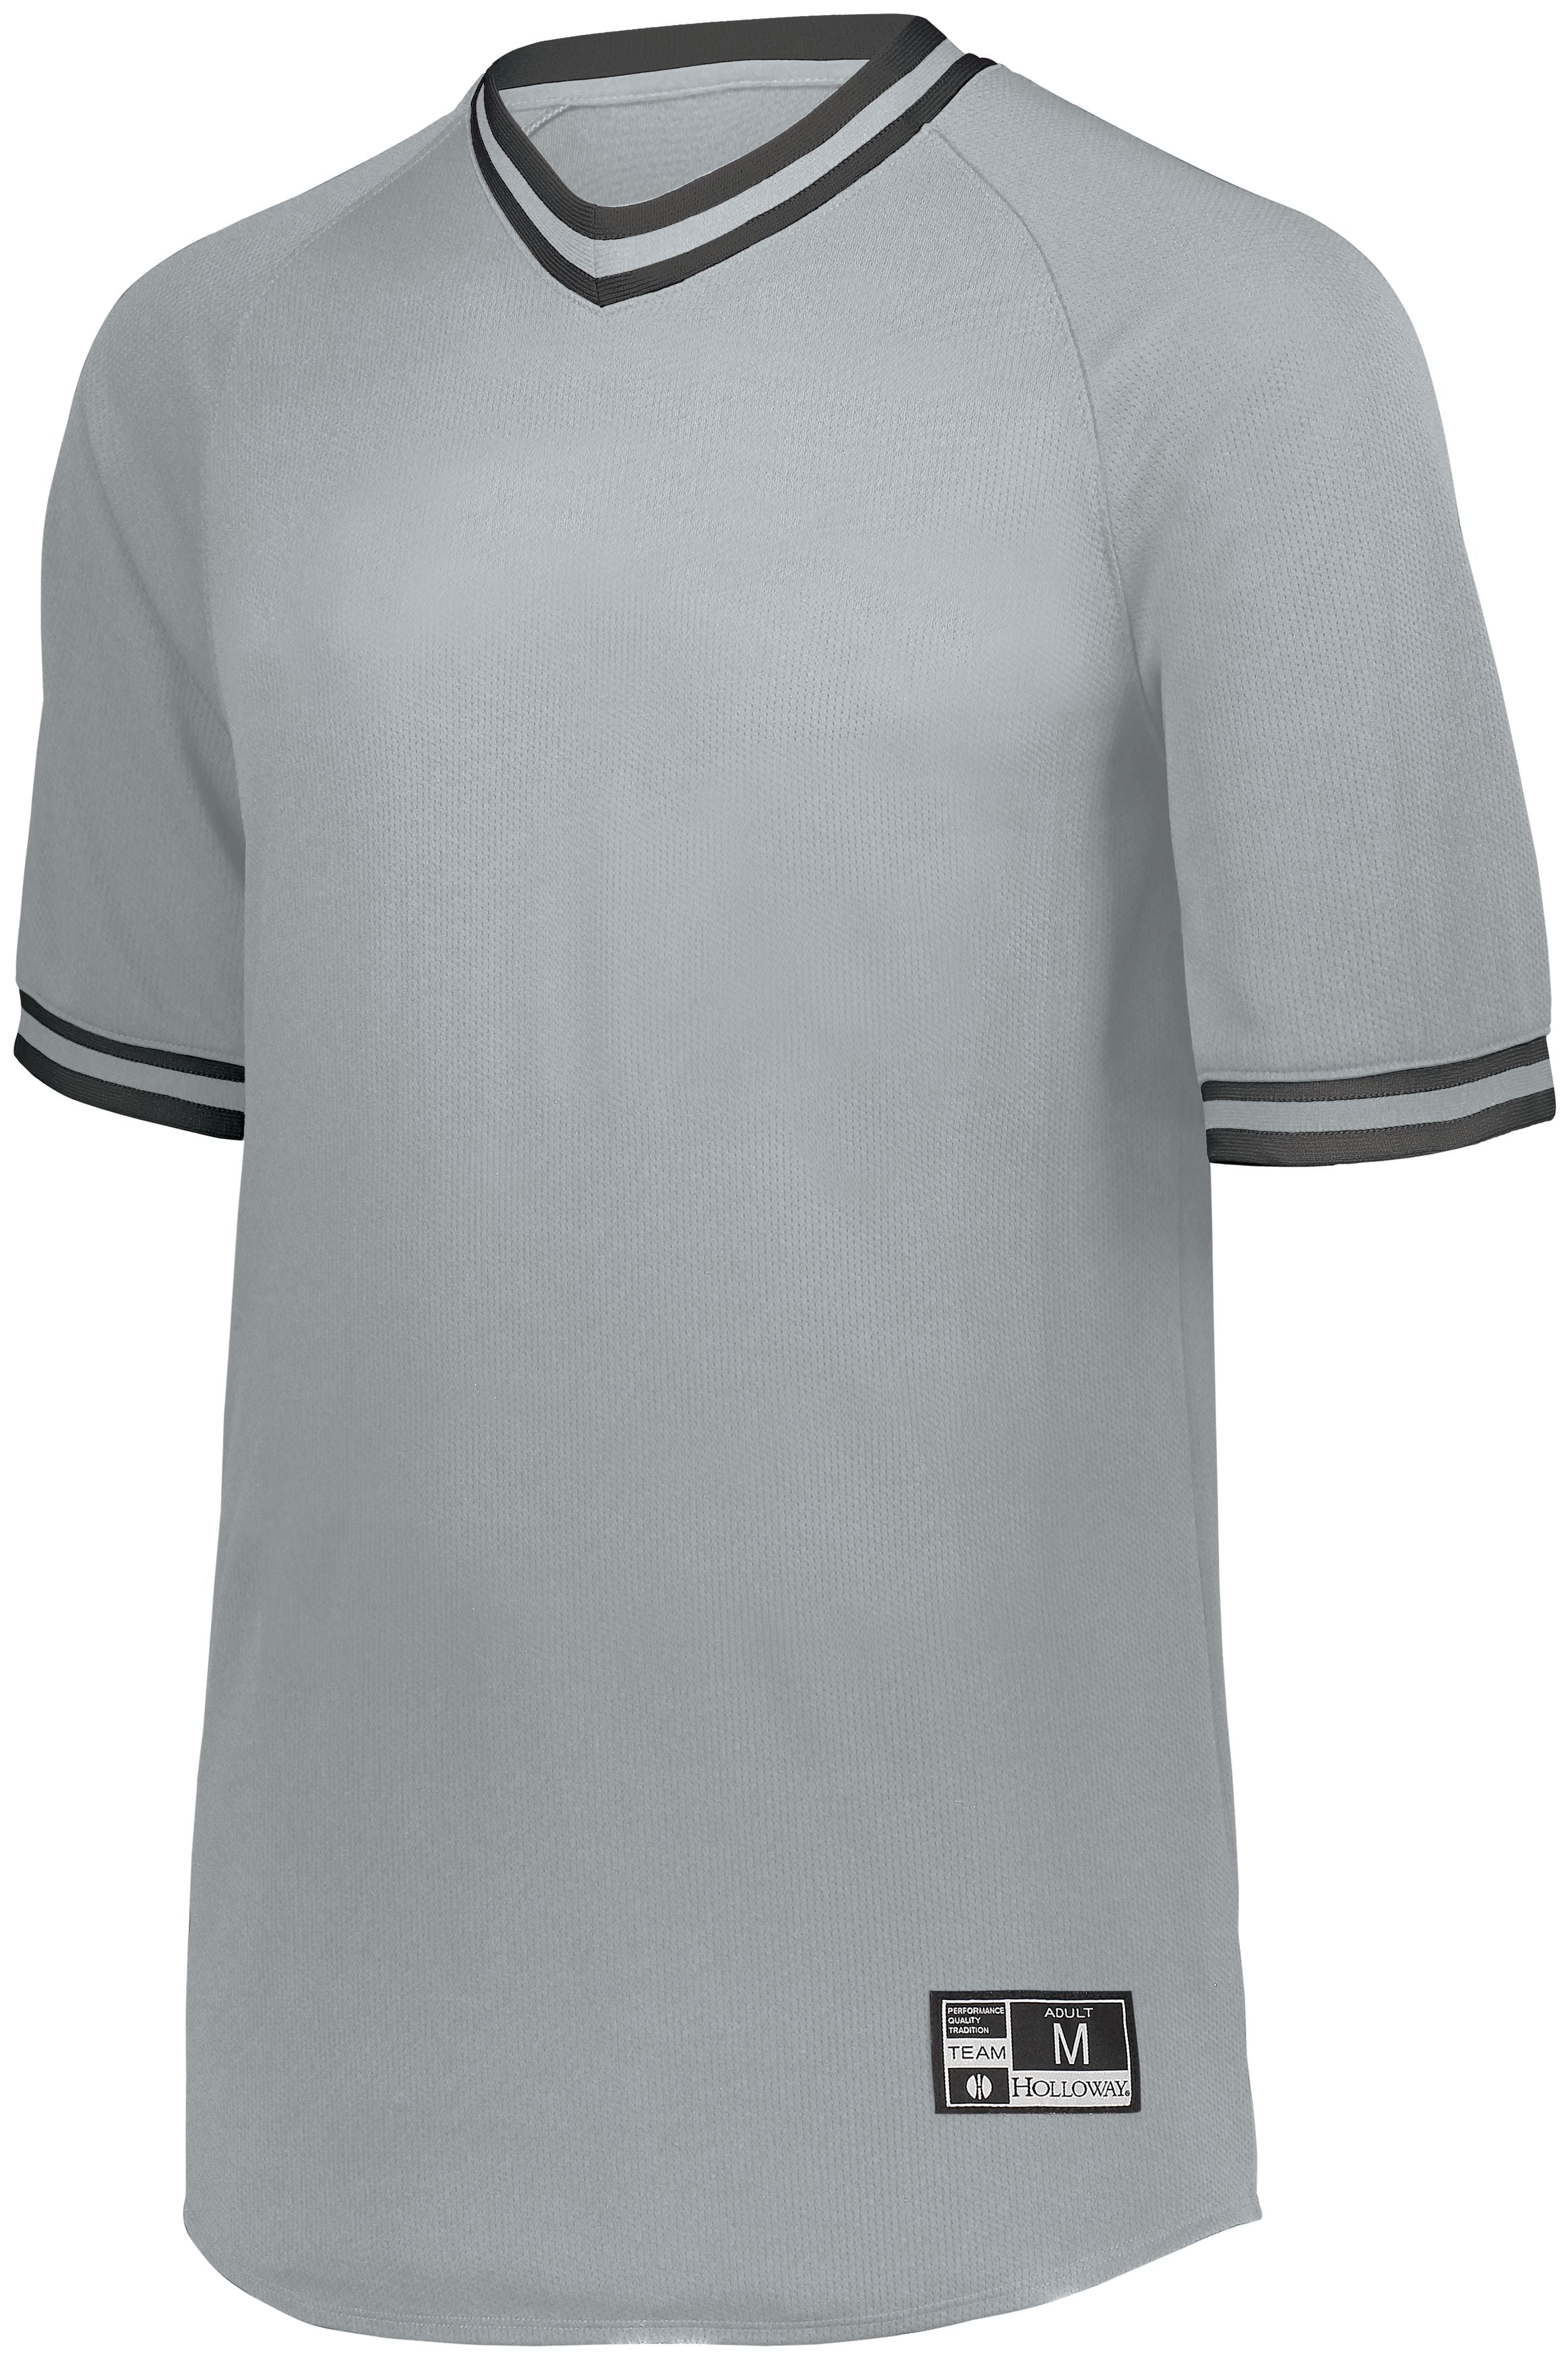 Holloway Retro V-Neck Baseball Jersey in Silver/Black  -Part of the Adult, Adult-Jersey, Baseball, Holloway, Shirts, All-Sports, All-Sports-1 product lines at KanaleyCreations.com